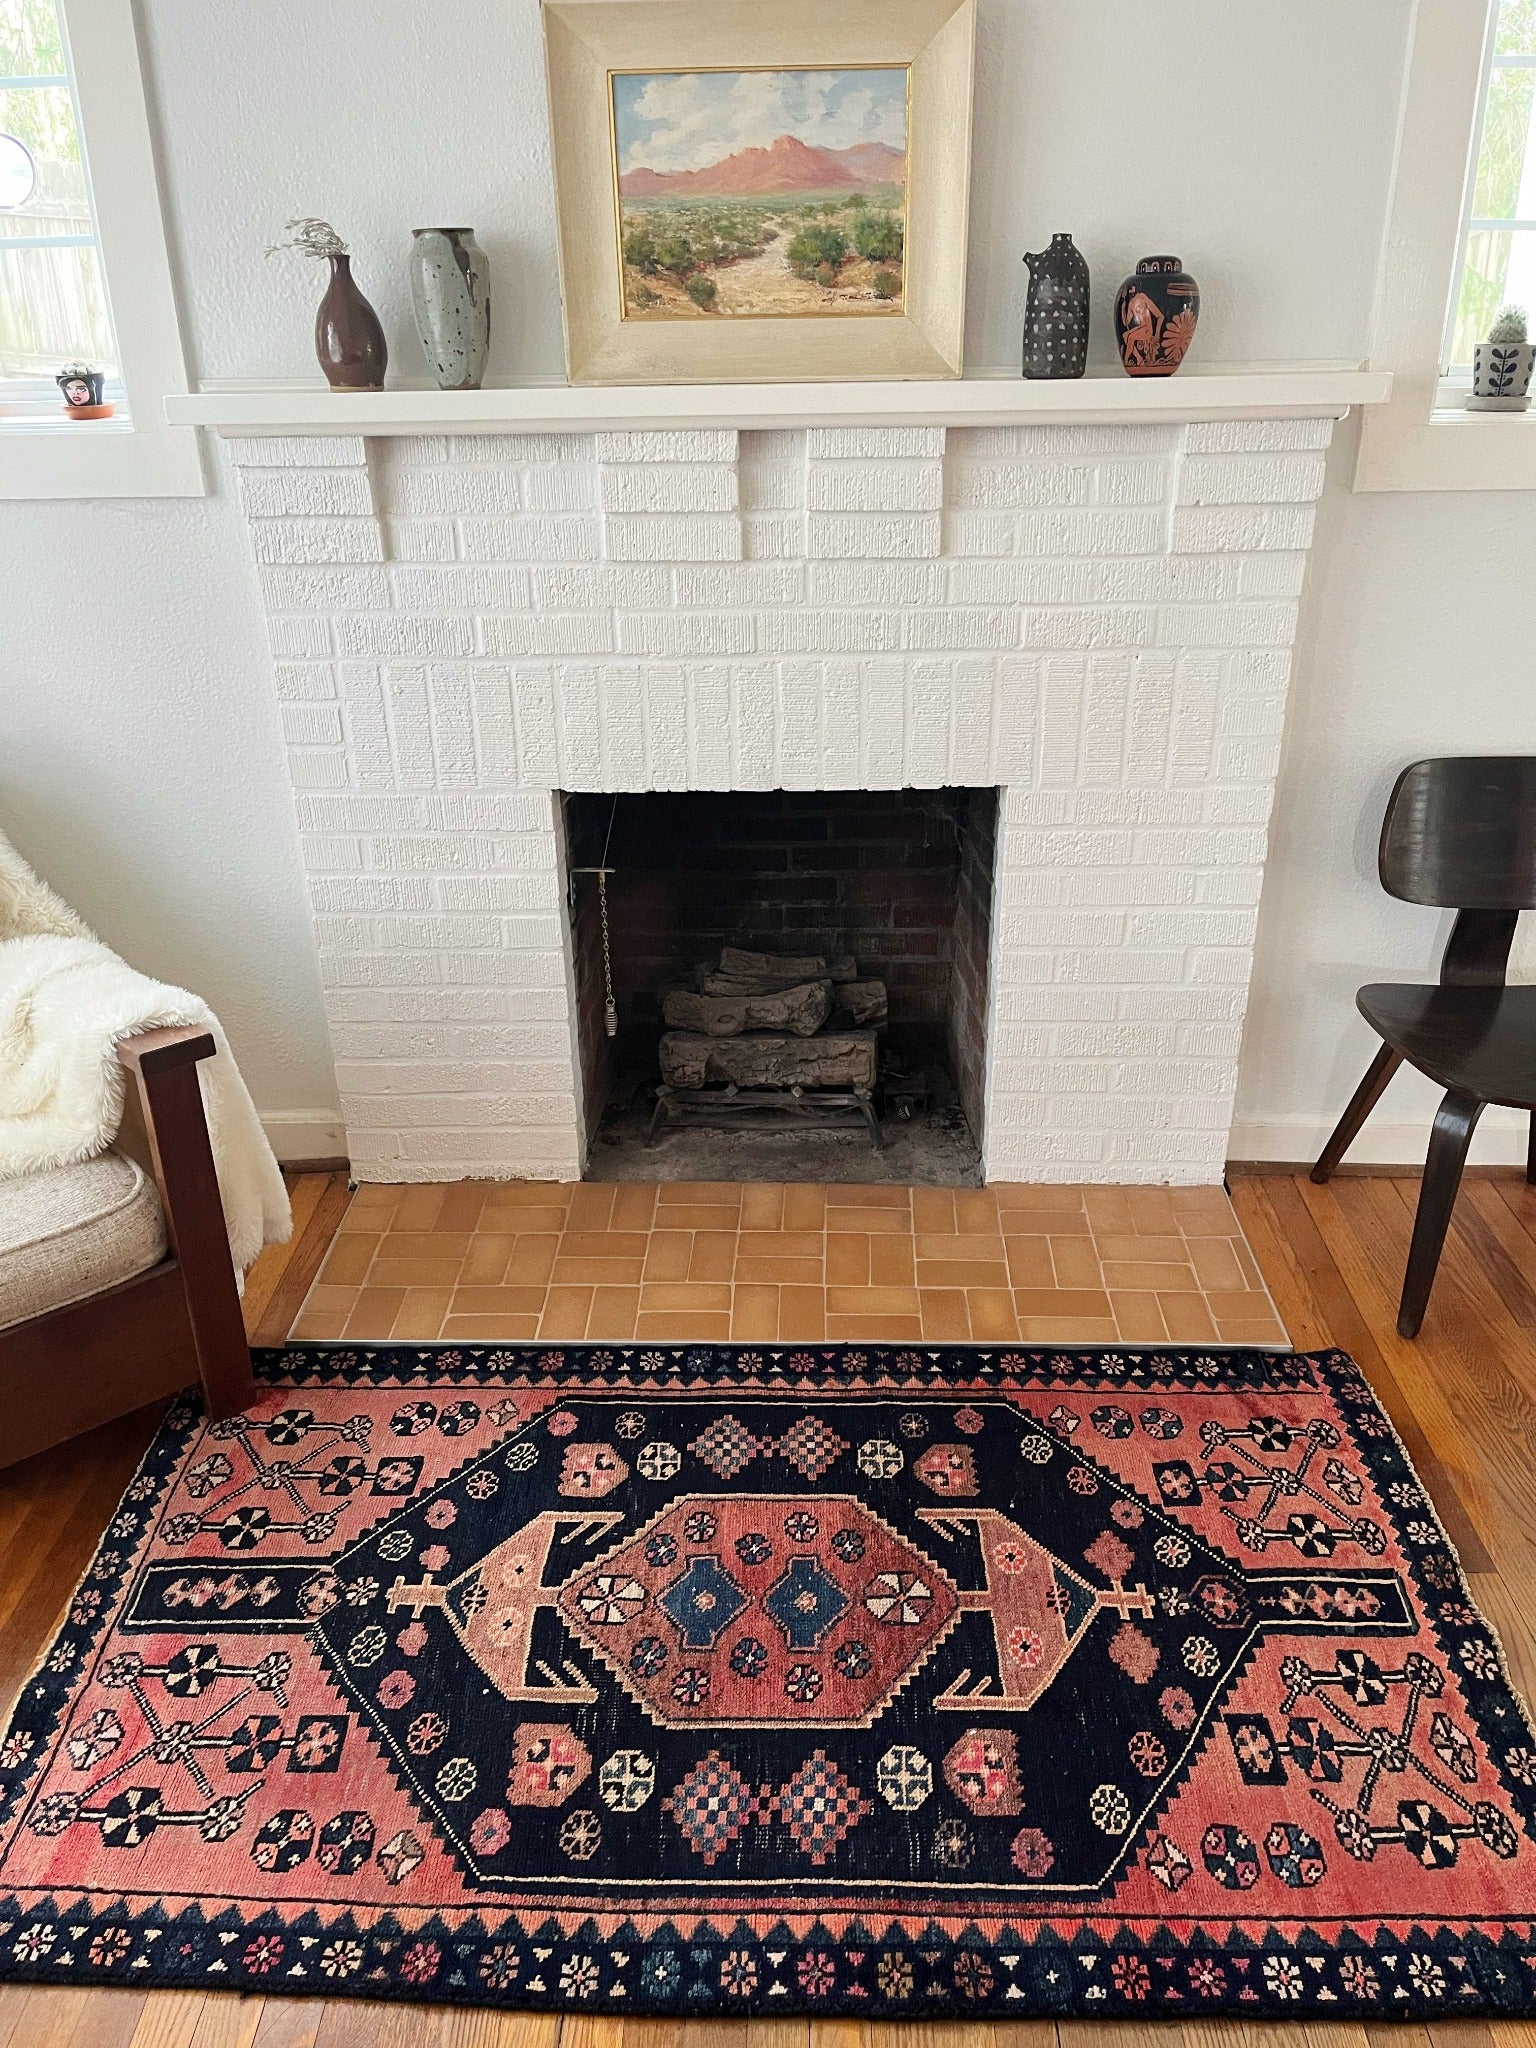 See Ceiba Persian Rug by a Fireplace